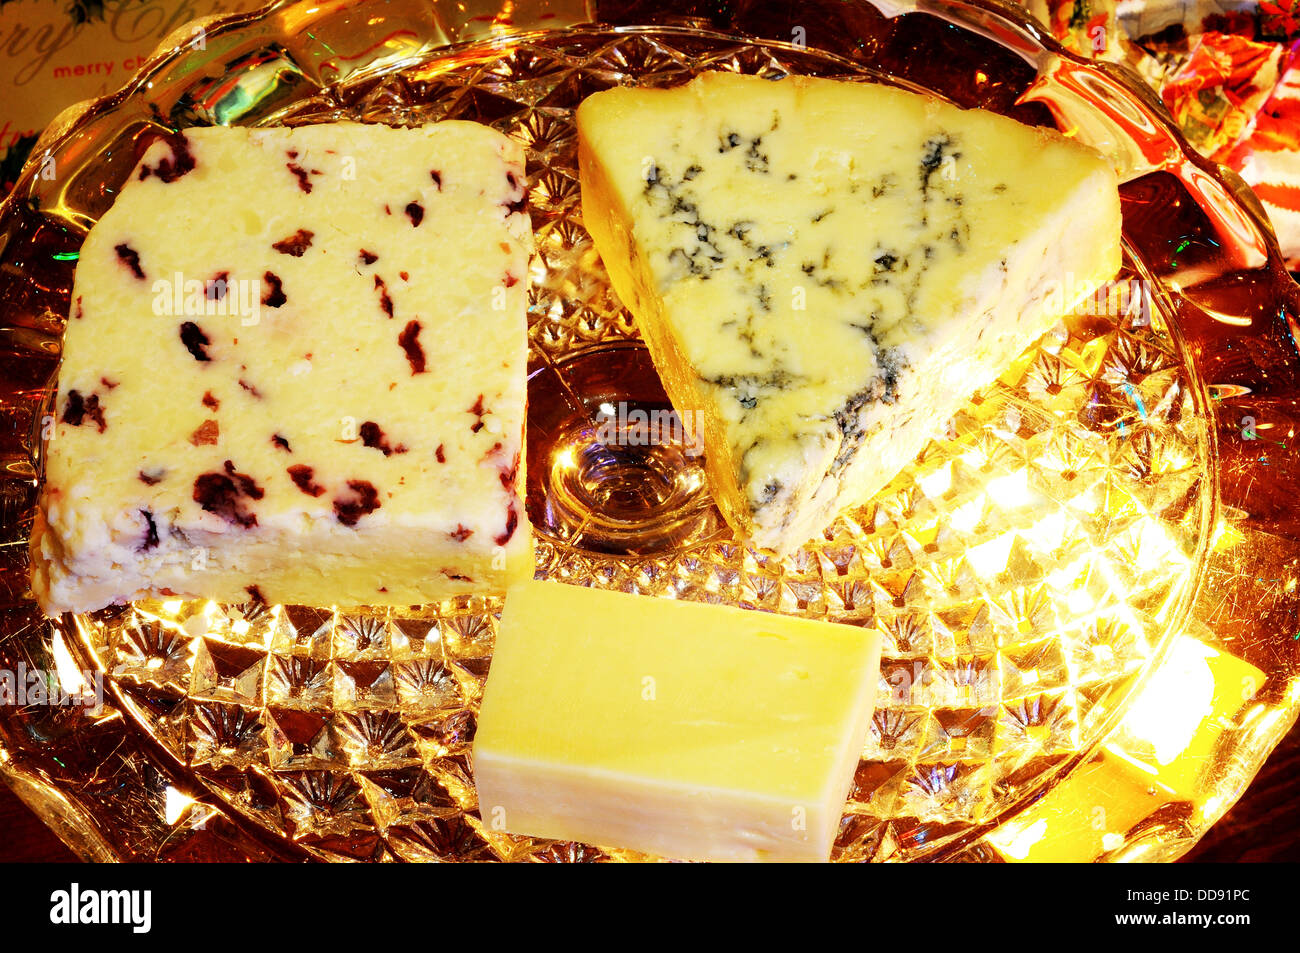 Blue Stilton, Wensleydale with cranberries and Cheddar cheeses on a glass plate. Stock Photo